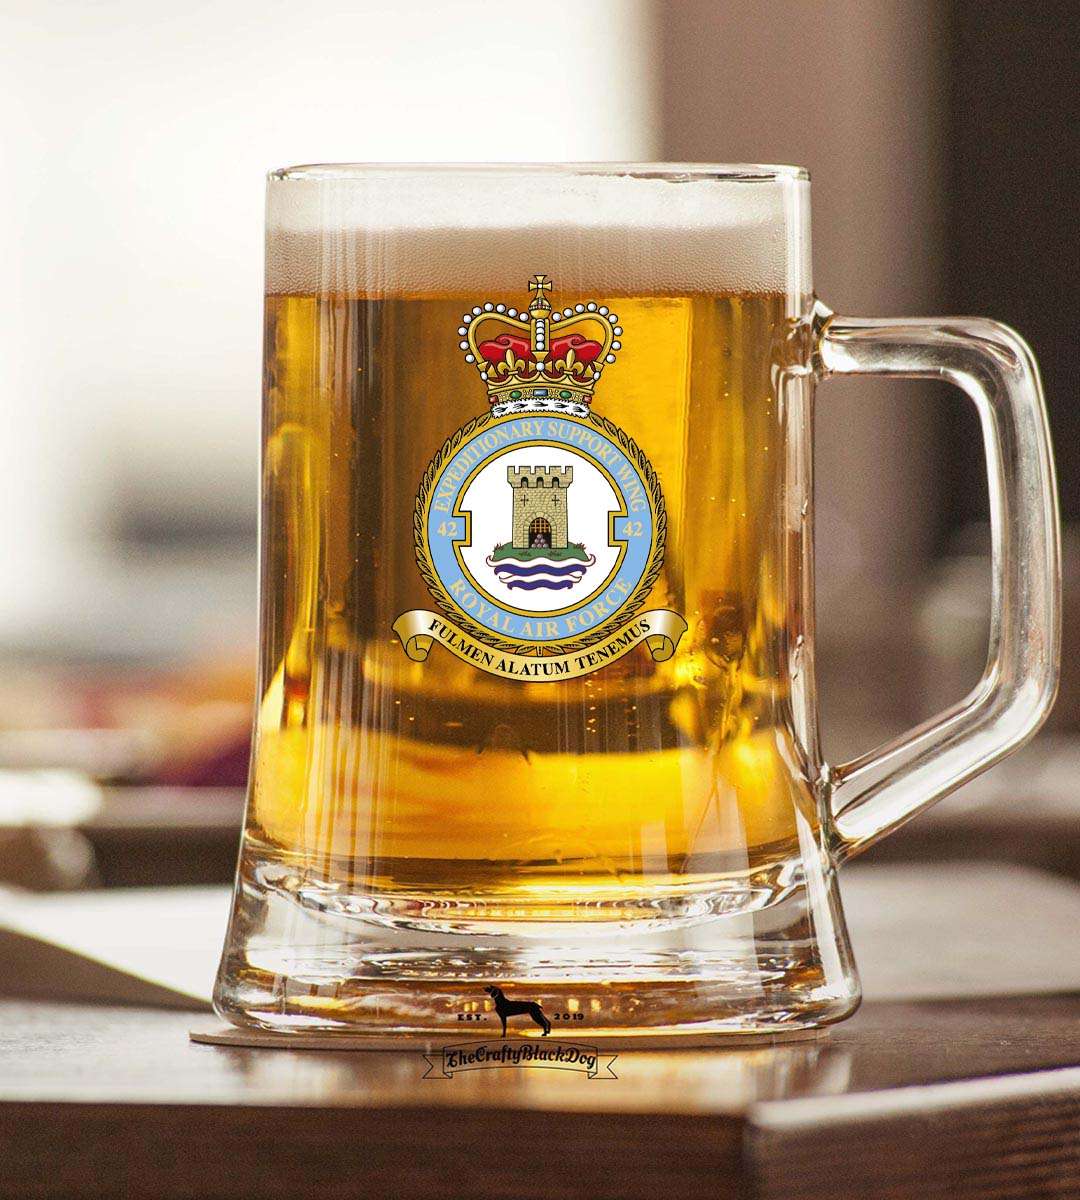 42 Expeditionary Support Wing RAF- Tankard